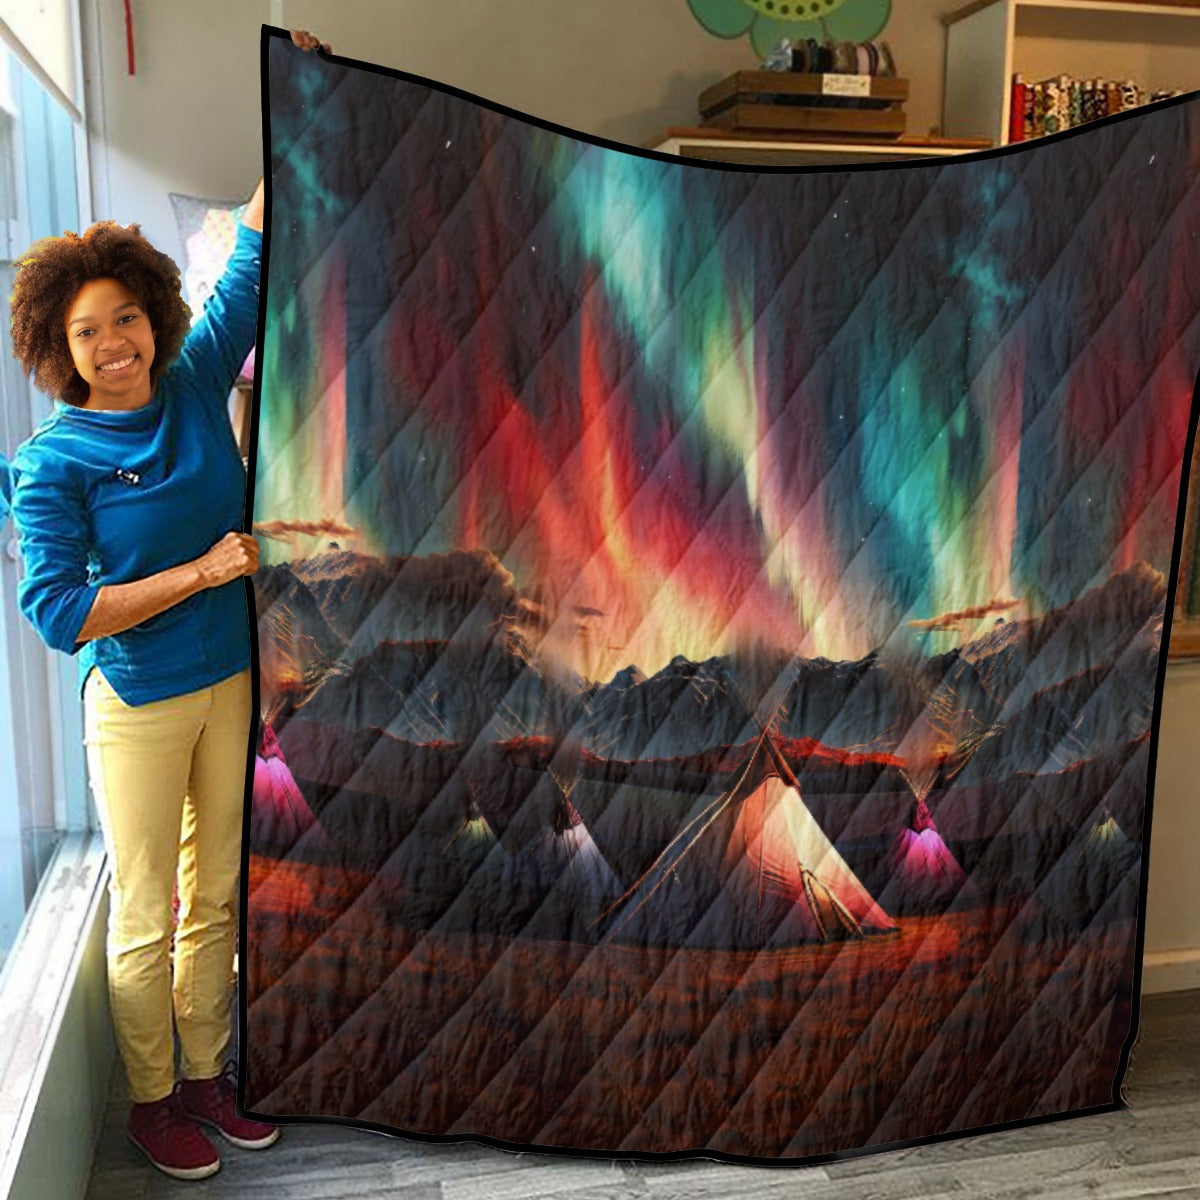 When the Sun Cried 2Lightweight & Breathable Quilt With Edge-wrapping Strips